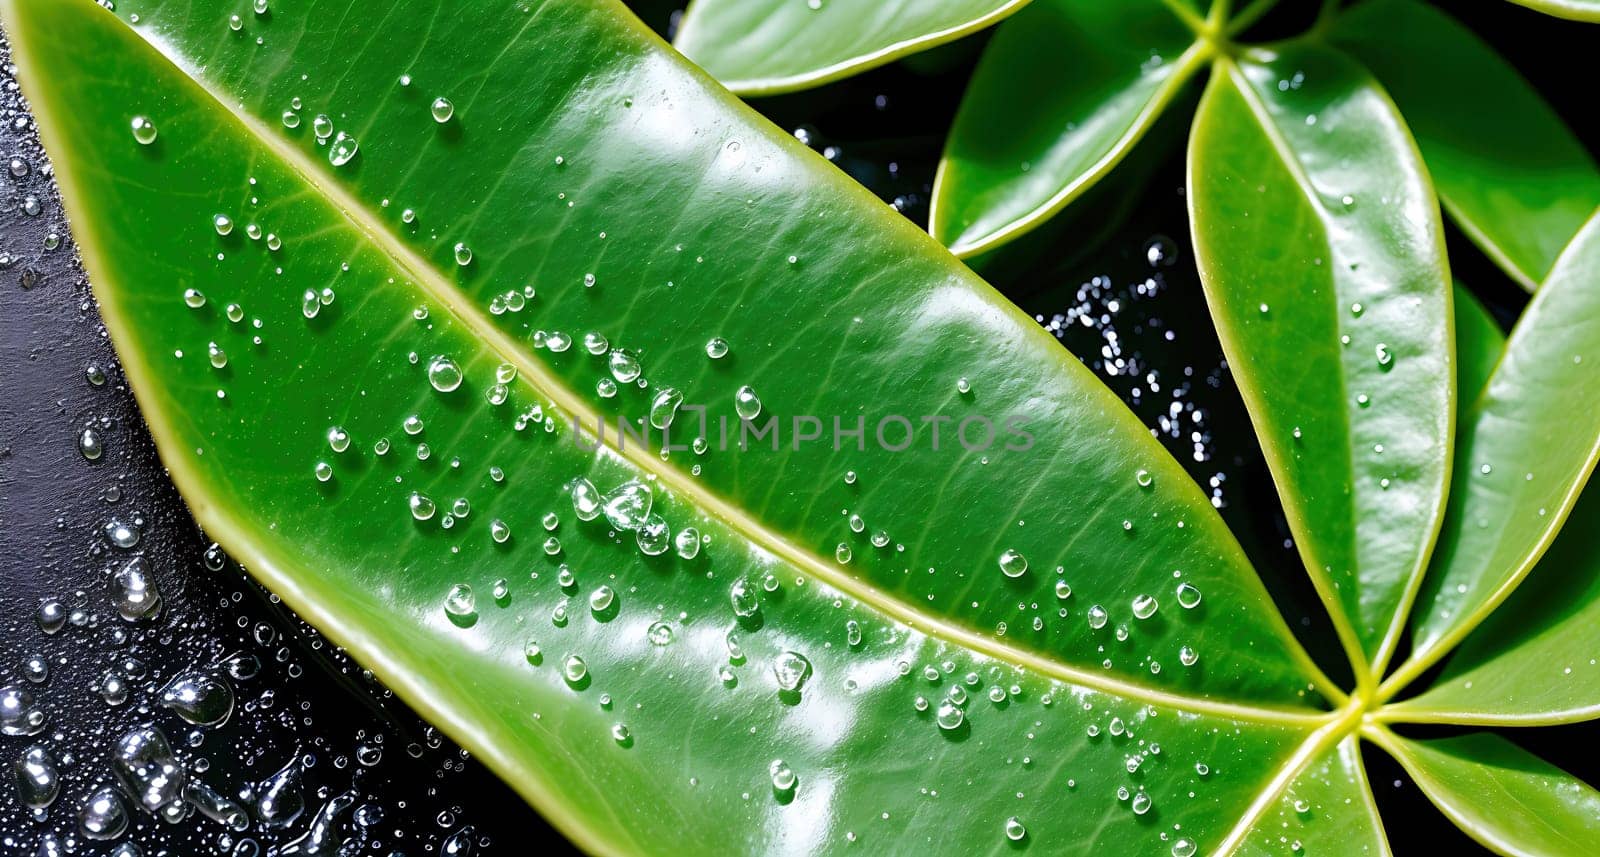 The image shows a group of green leaves with water droplets on them.